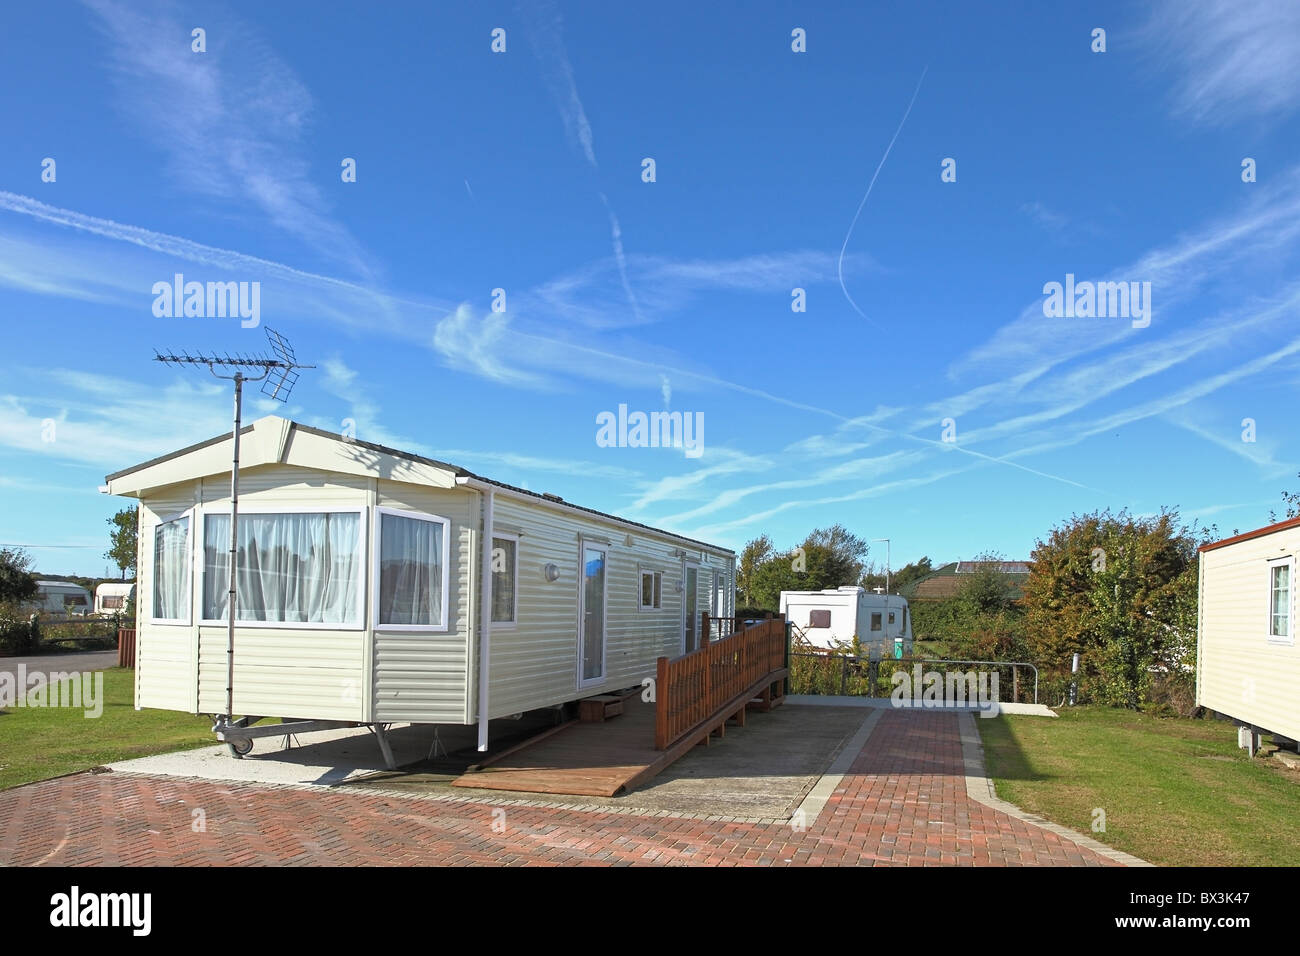 A luxury caravan holiday home sited on a smart caravan park - UK. Note, the access ramp for disabled persons. Stock Photo